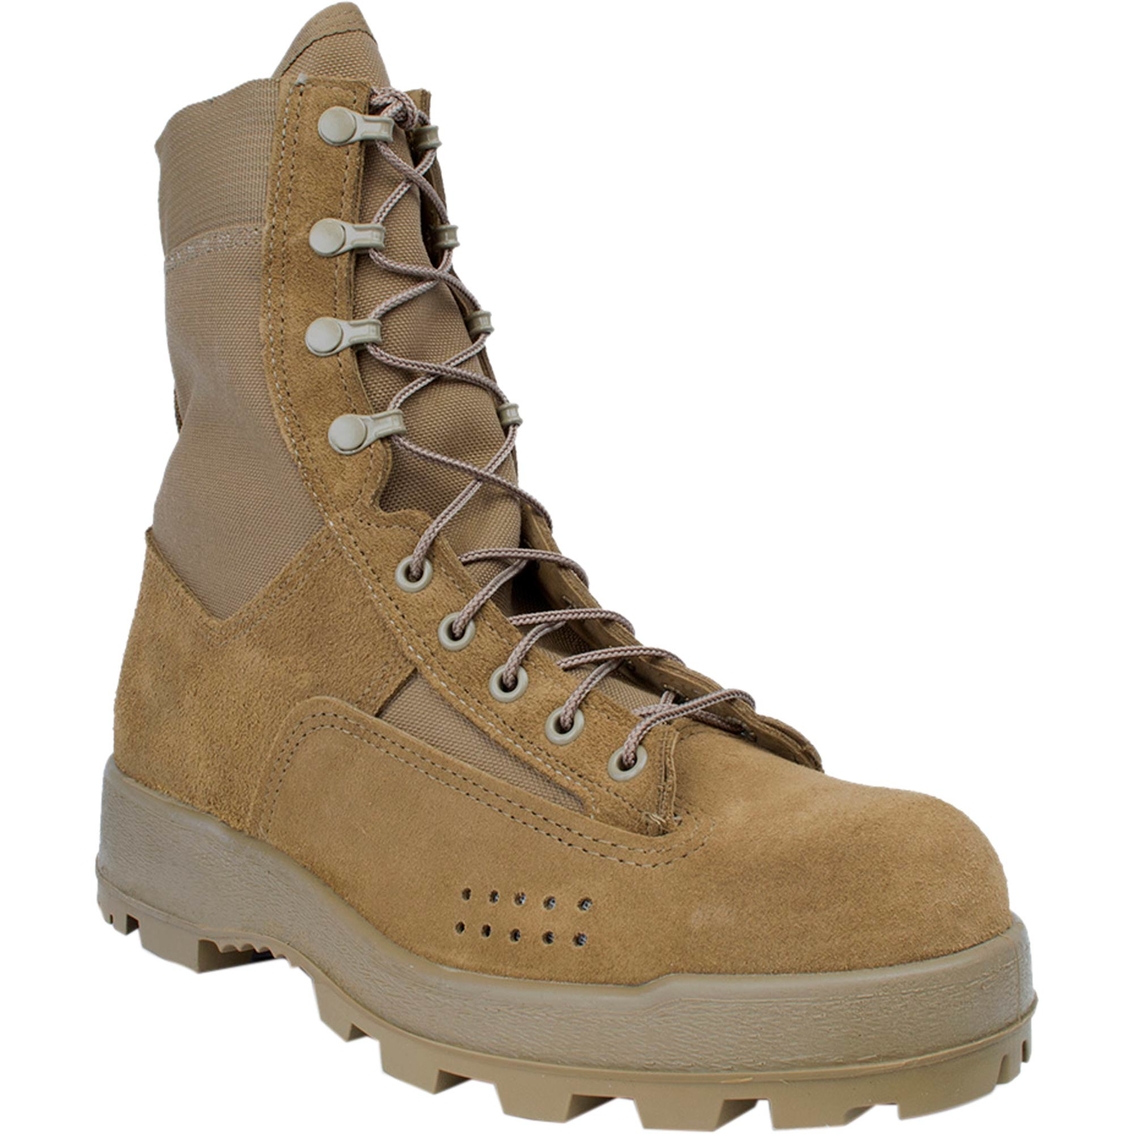 Mcrae Jbii Army Hot Weather Jungle Boots | Boots | Shoes | Shop The ...